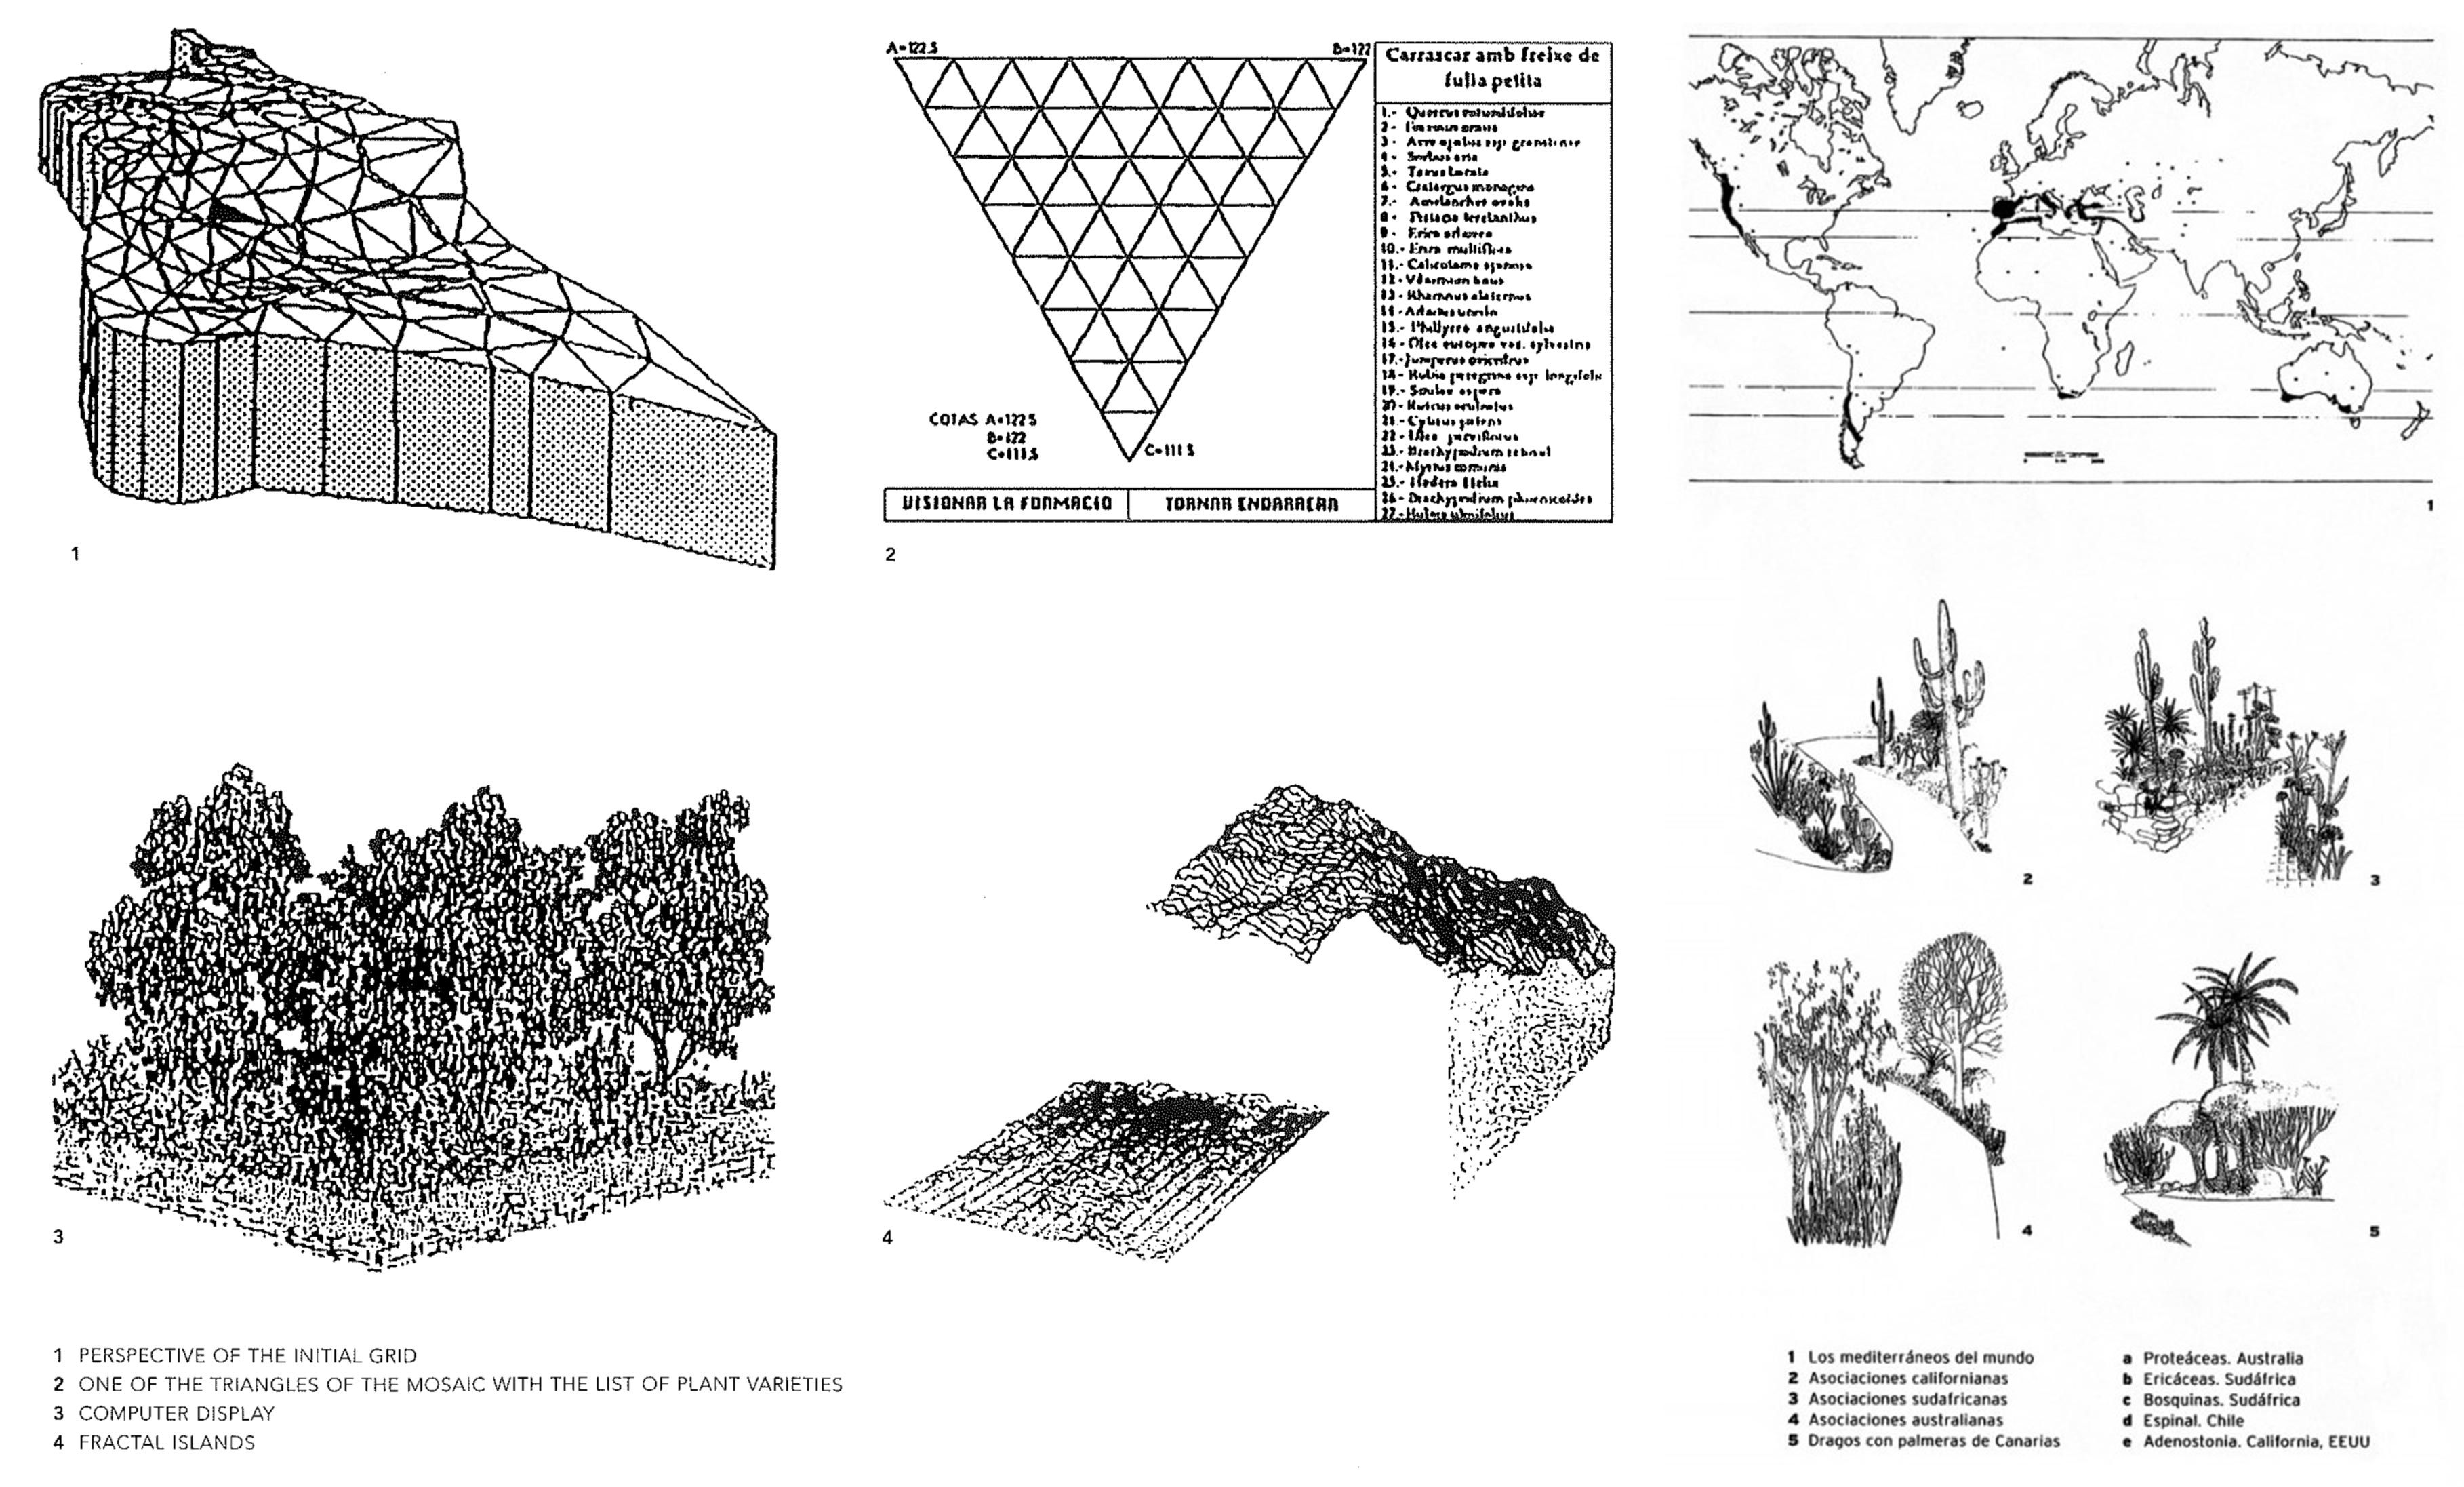 Images produced by the computer program developed to assign species typologies across each of the grid's facets.